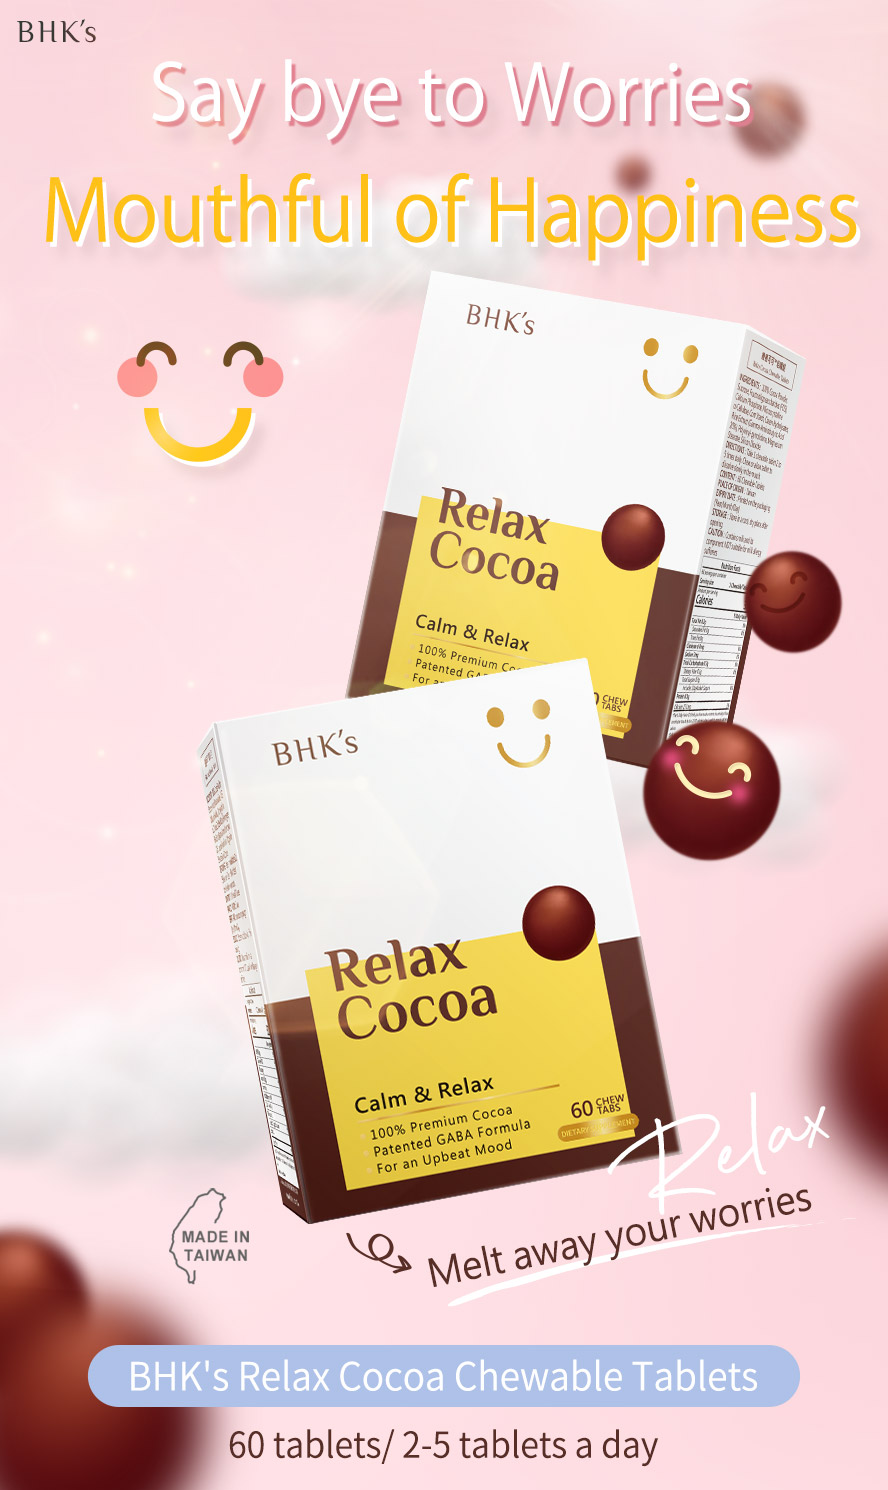 BHK's Relax Cocoa is formulated to stress relieving and reduce anxiety, regain good mood with rich cocoa!